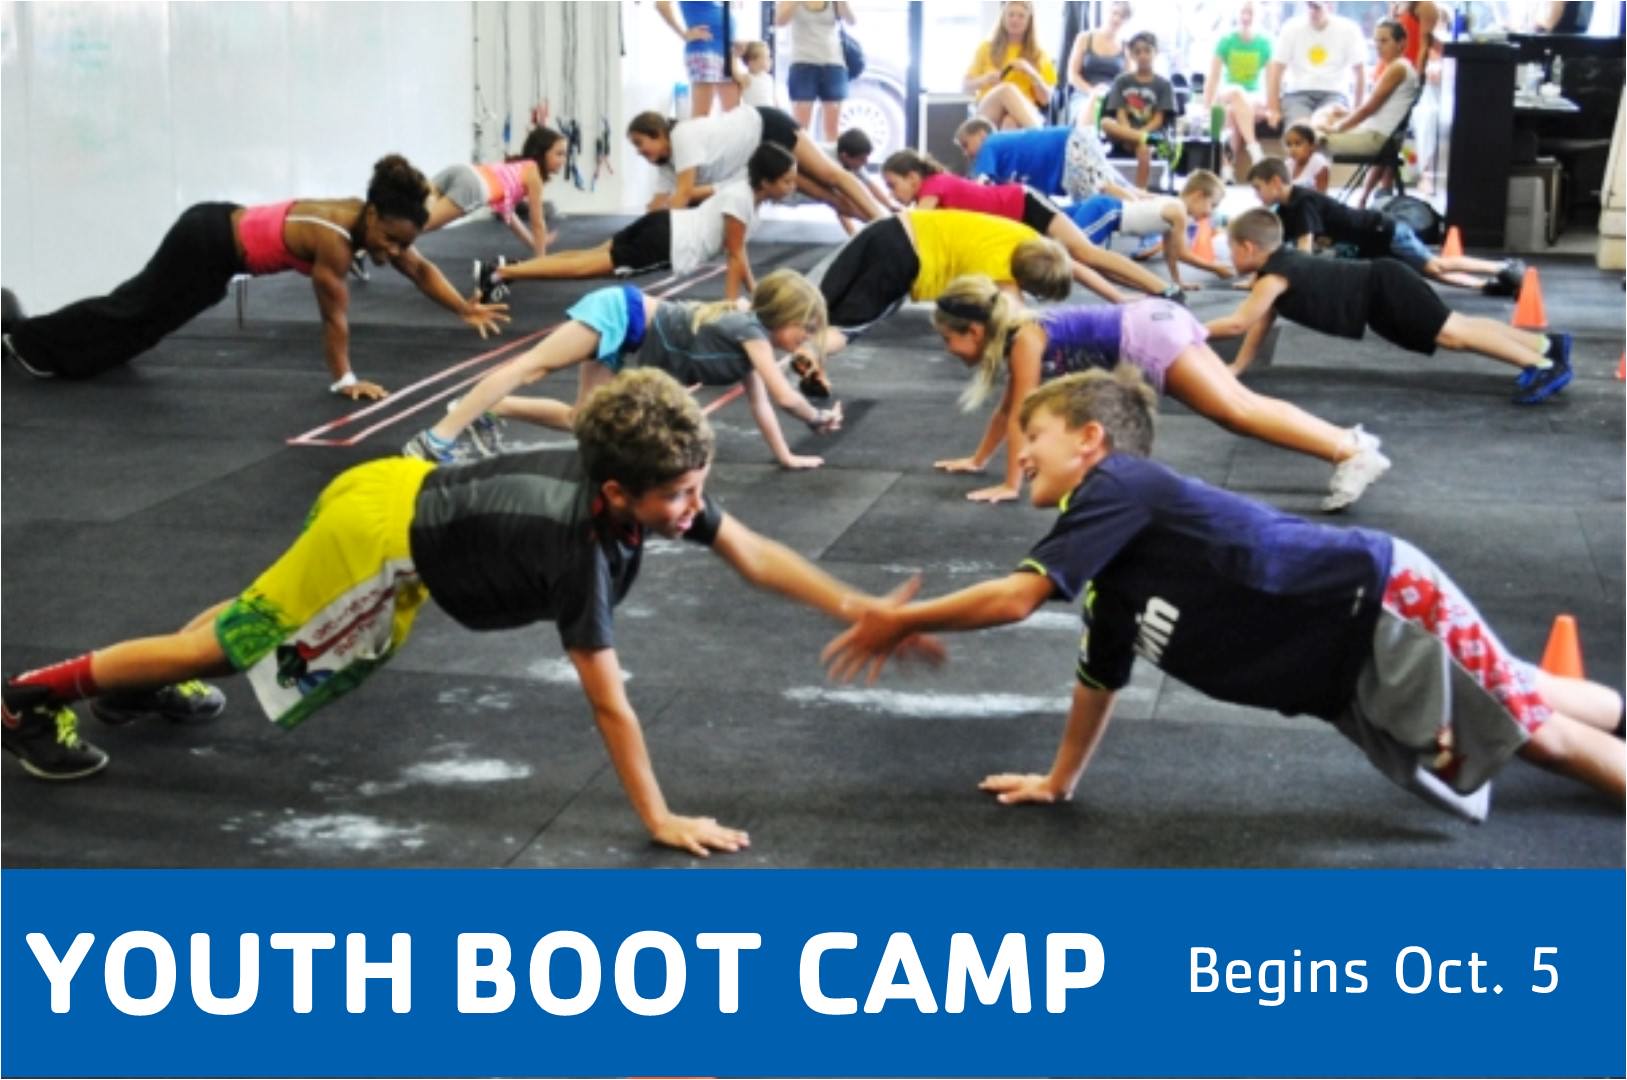 YOUTH BOOT CAMP